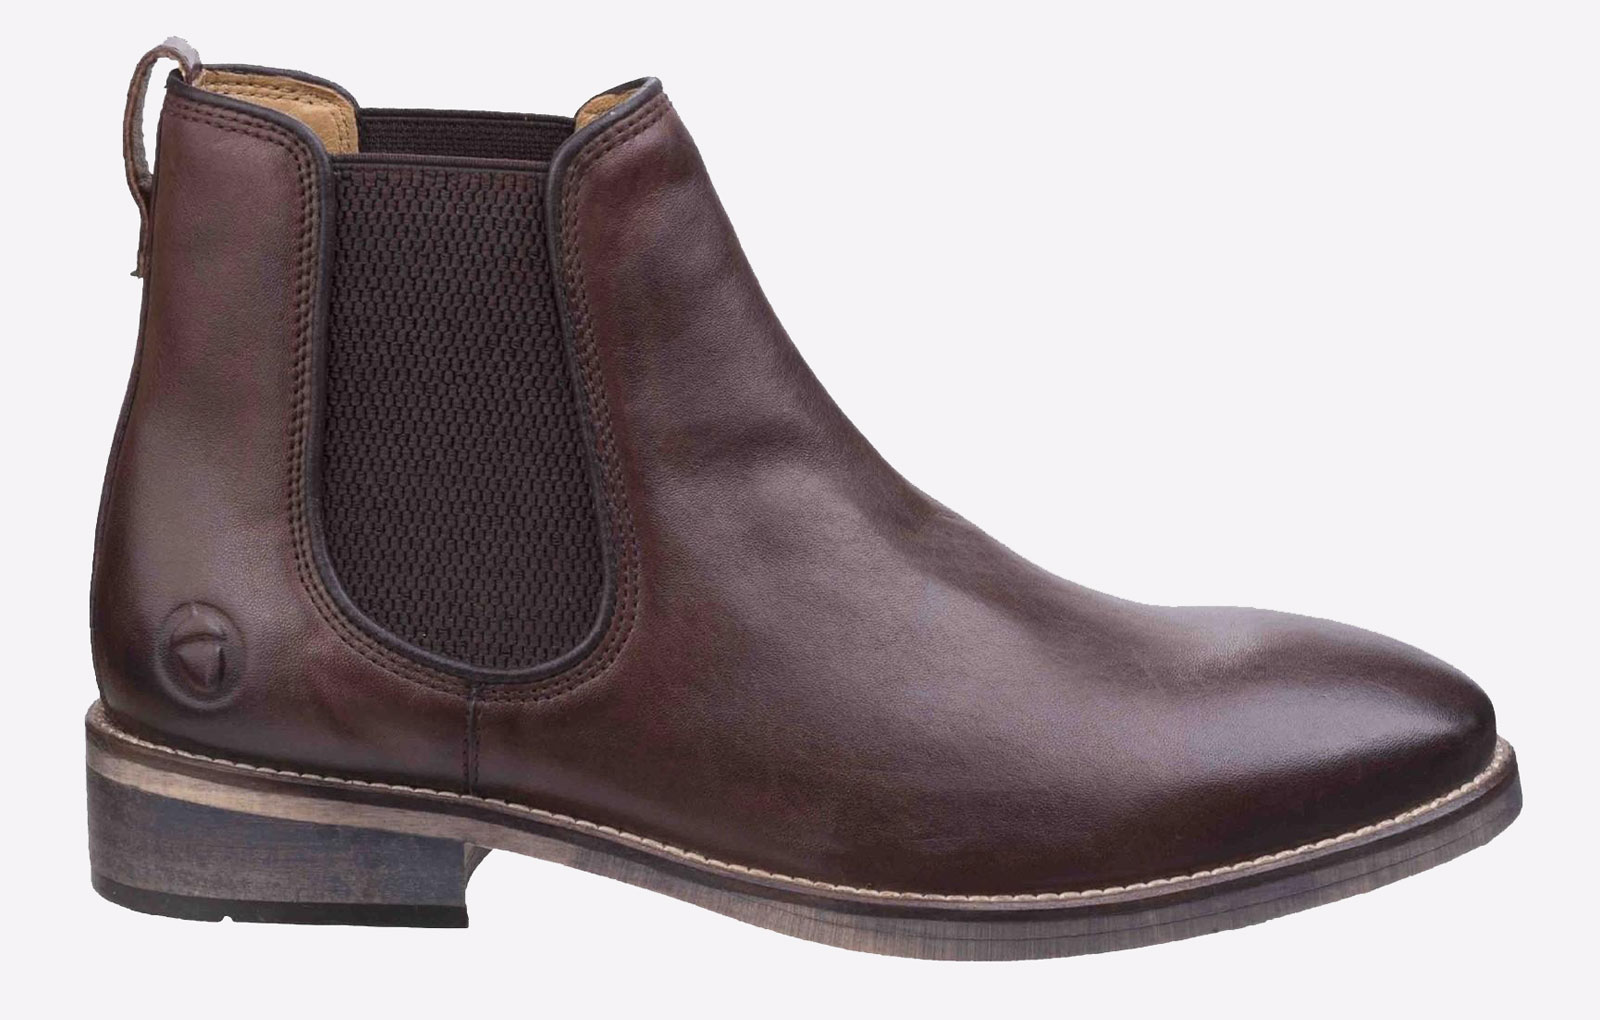 Cotswold Corsham Chelsea Boot Mens - GRD-26268-43812-12